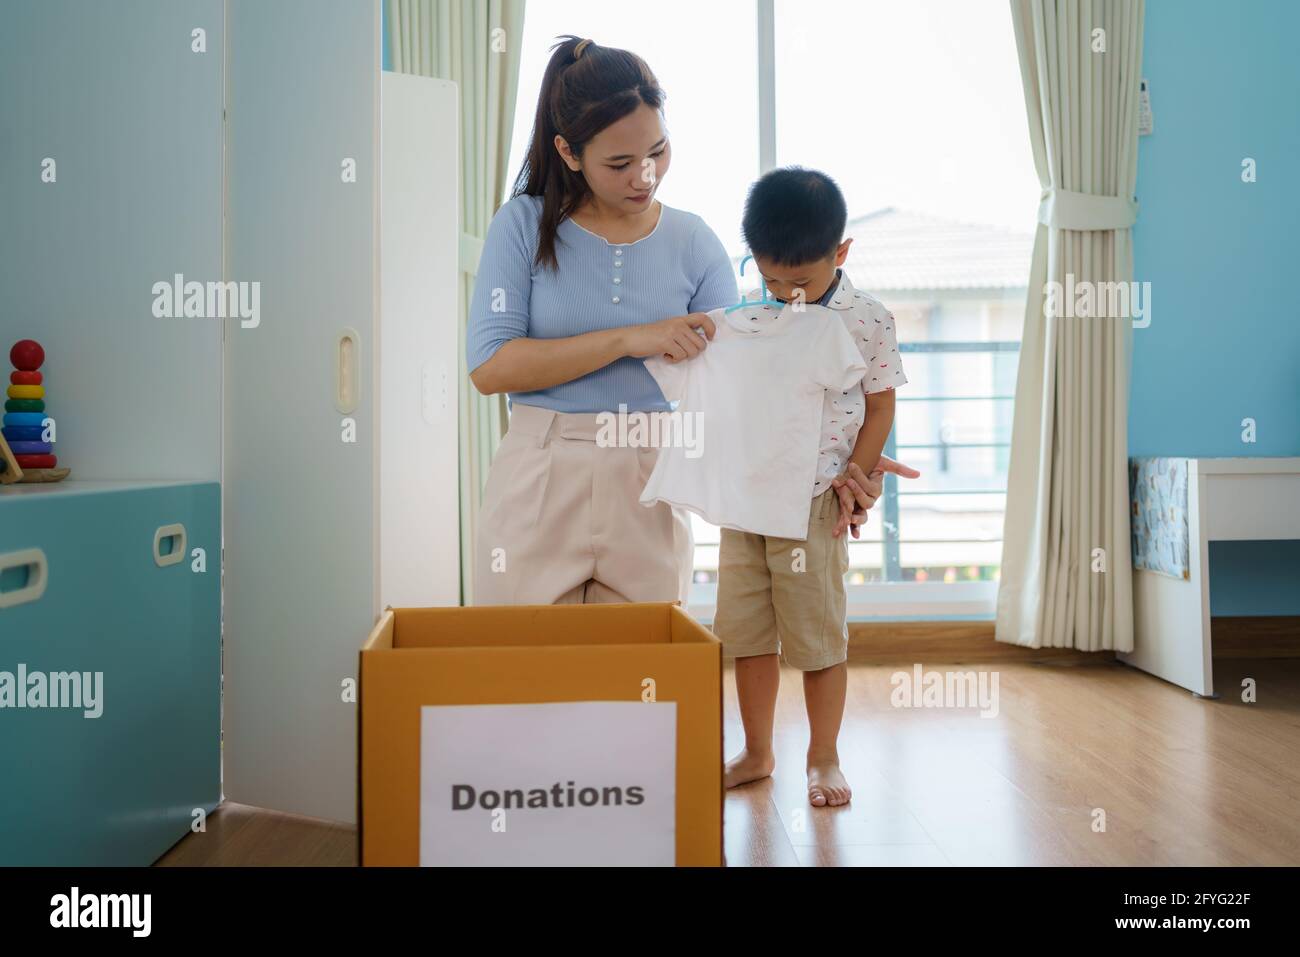 Asian mother and son are standing near closet of clothes in the dressing room carrying a box of clothes donated to take to the donation center. Stock Photo